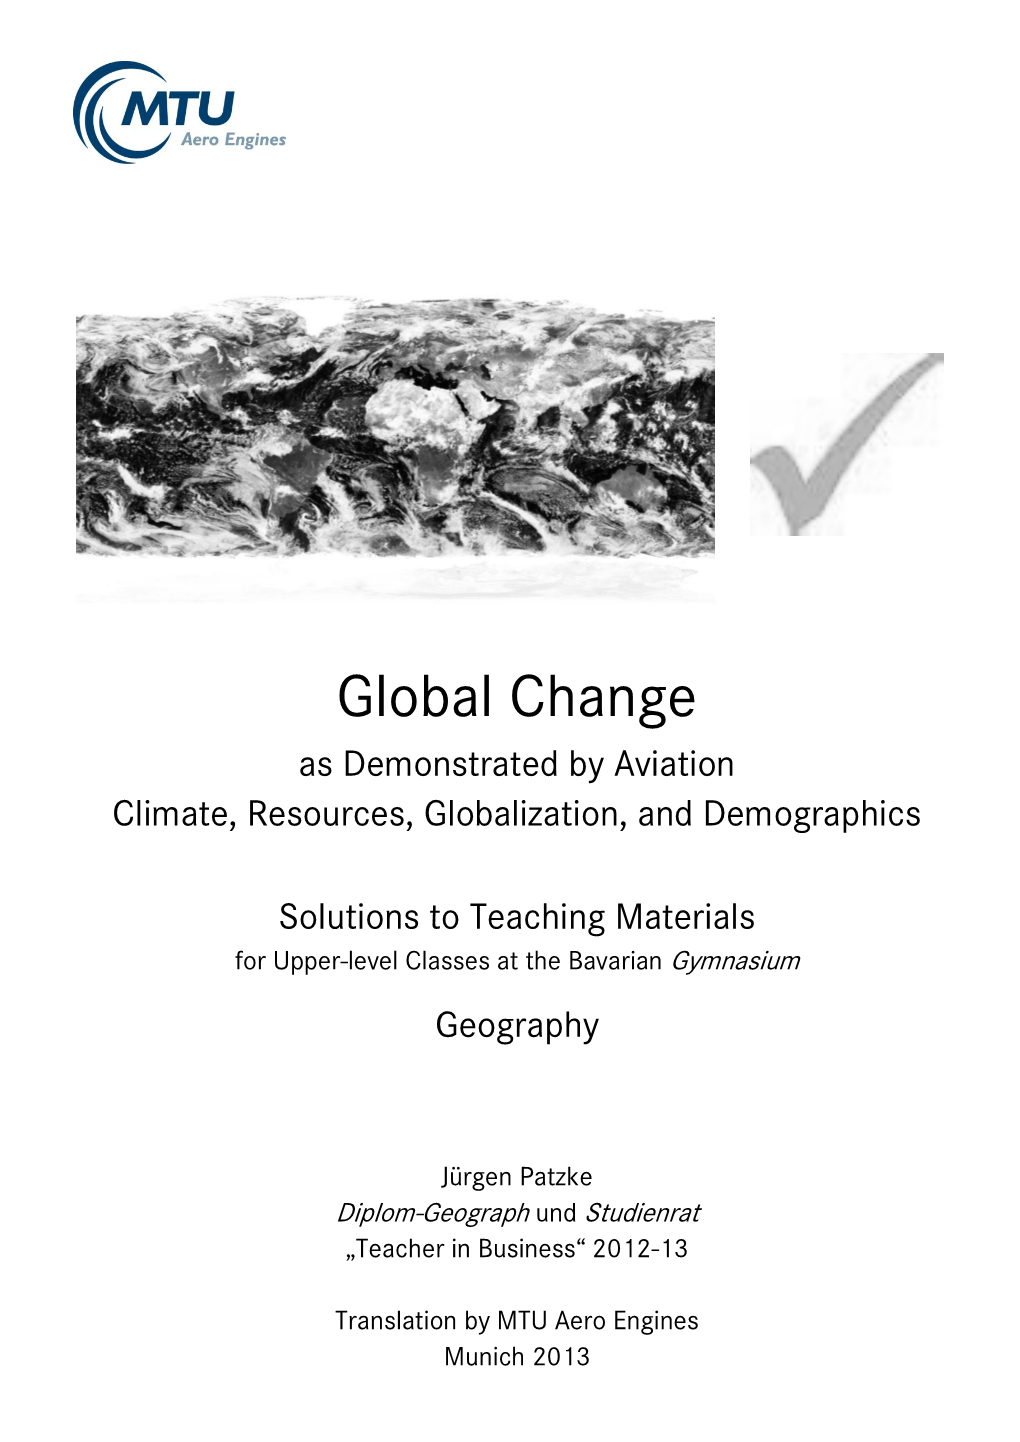 Global Change As Demonstrated by Aviation Climate, Resources, Globalization, and Demographics